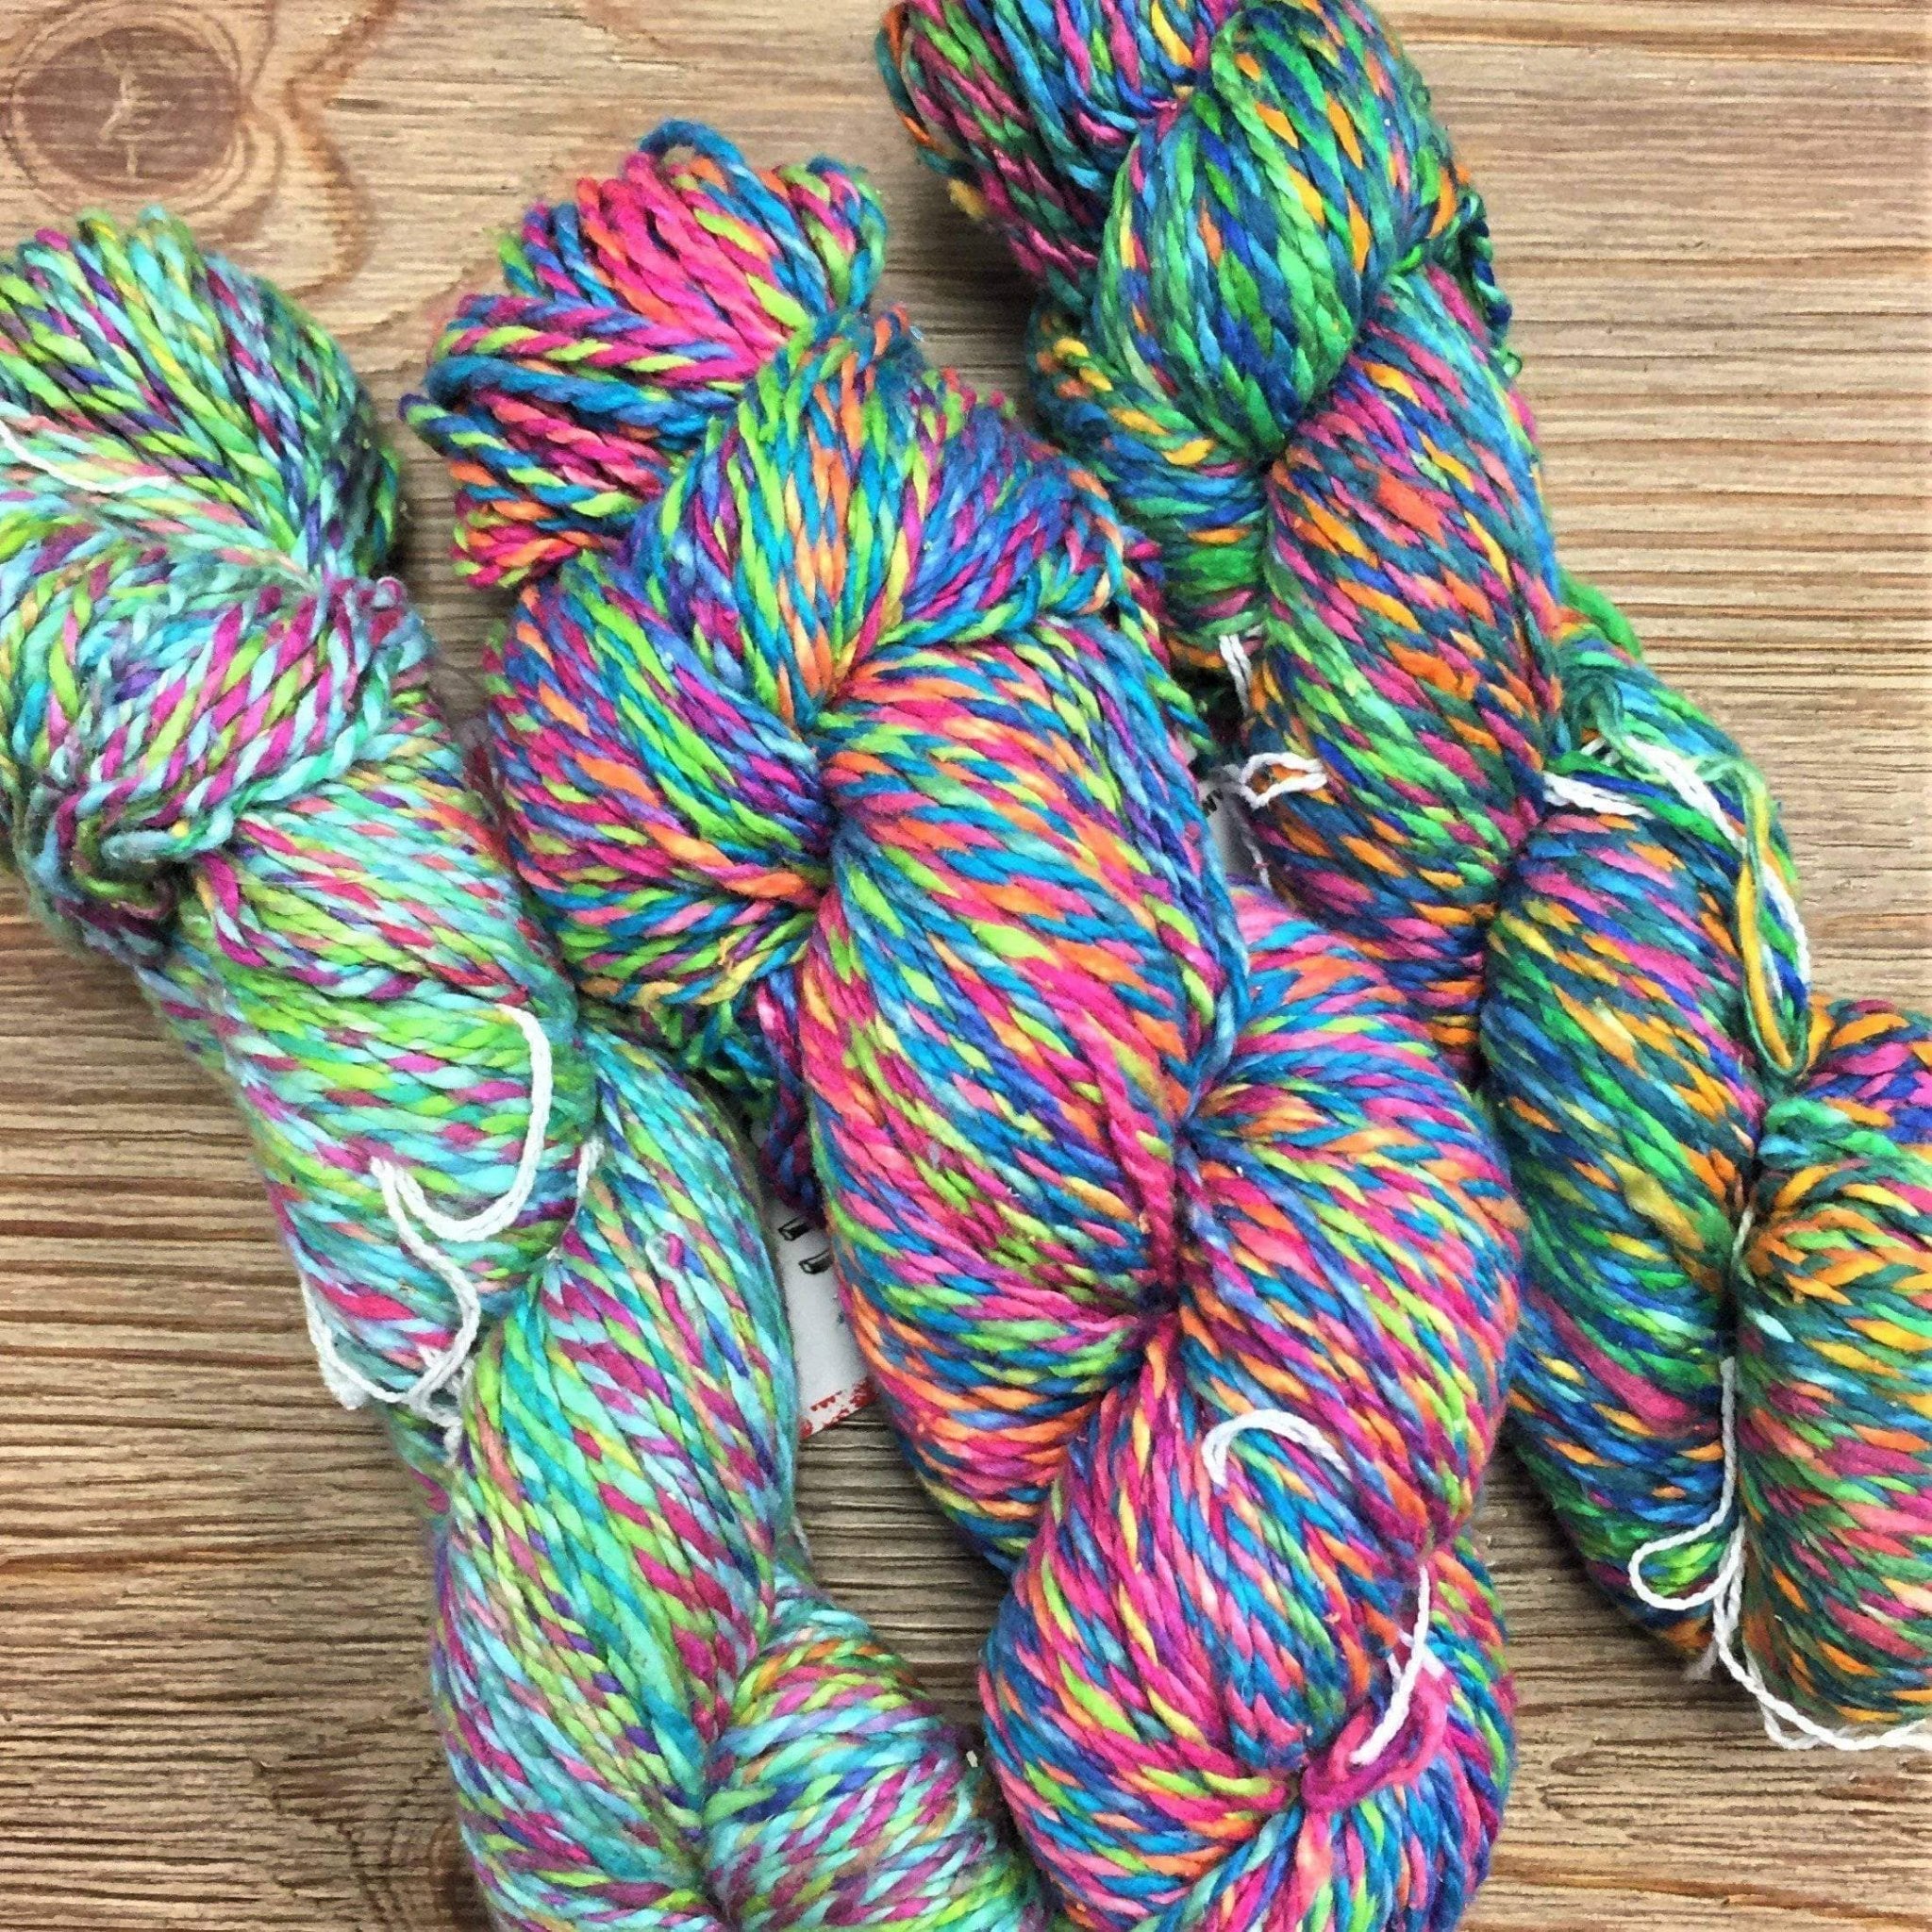 What Is Fingering Weight Yarn?, Expert Guide